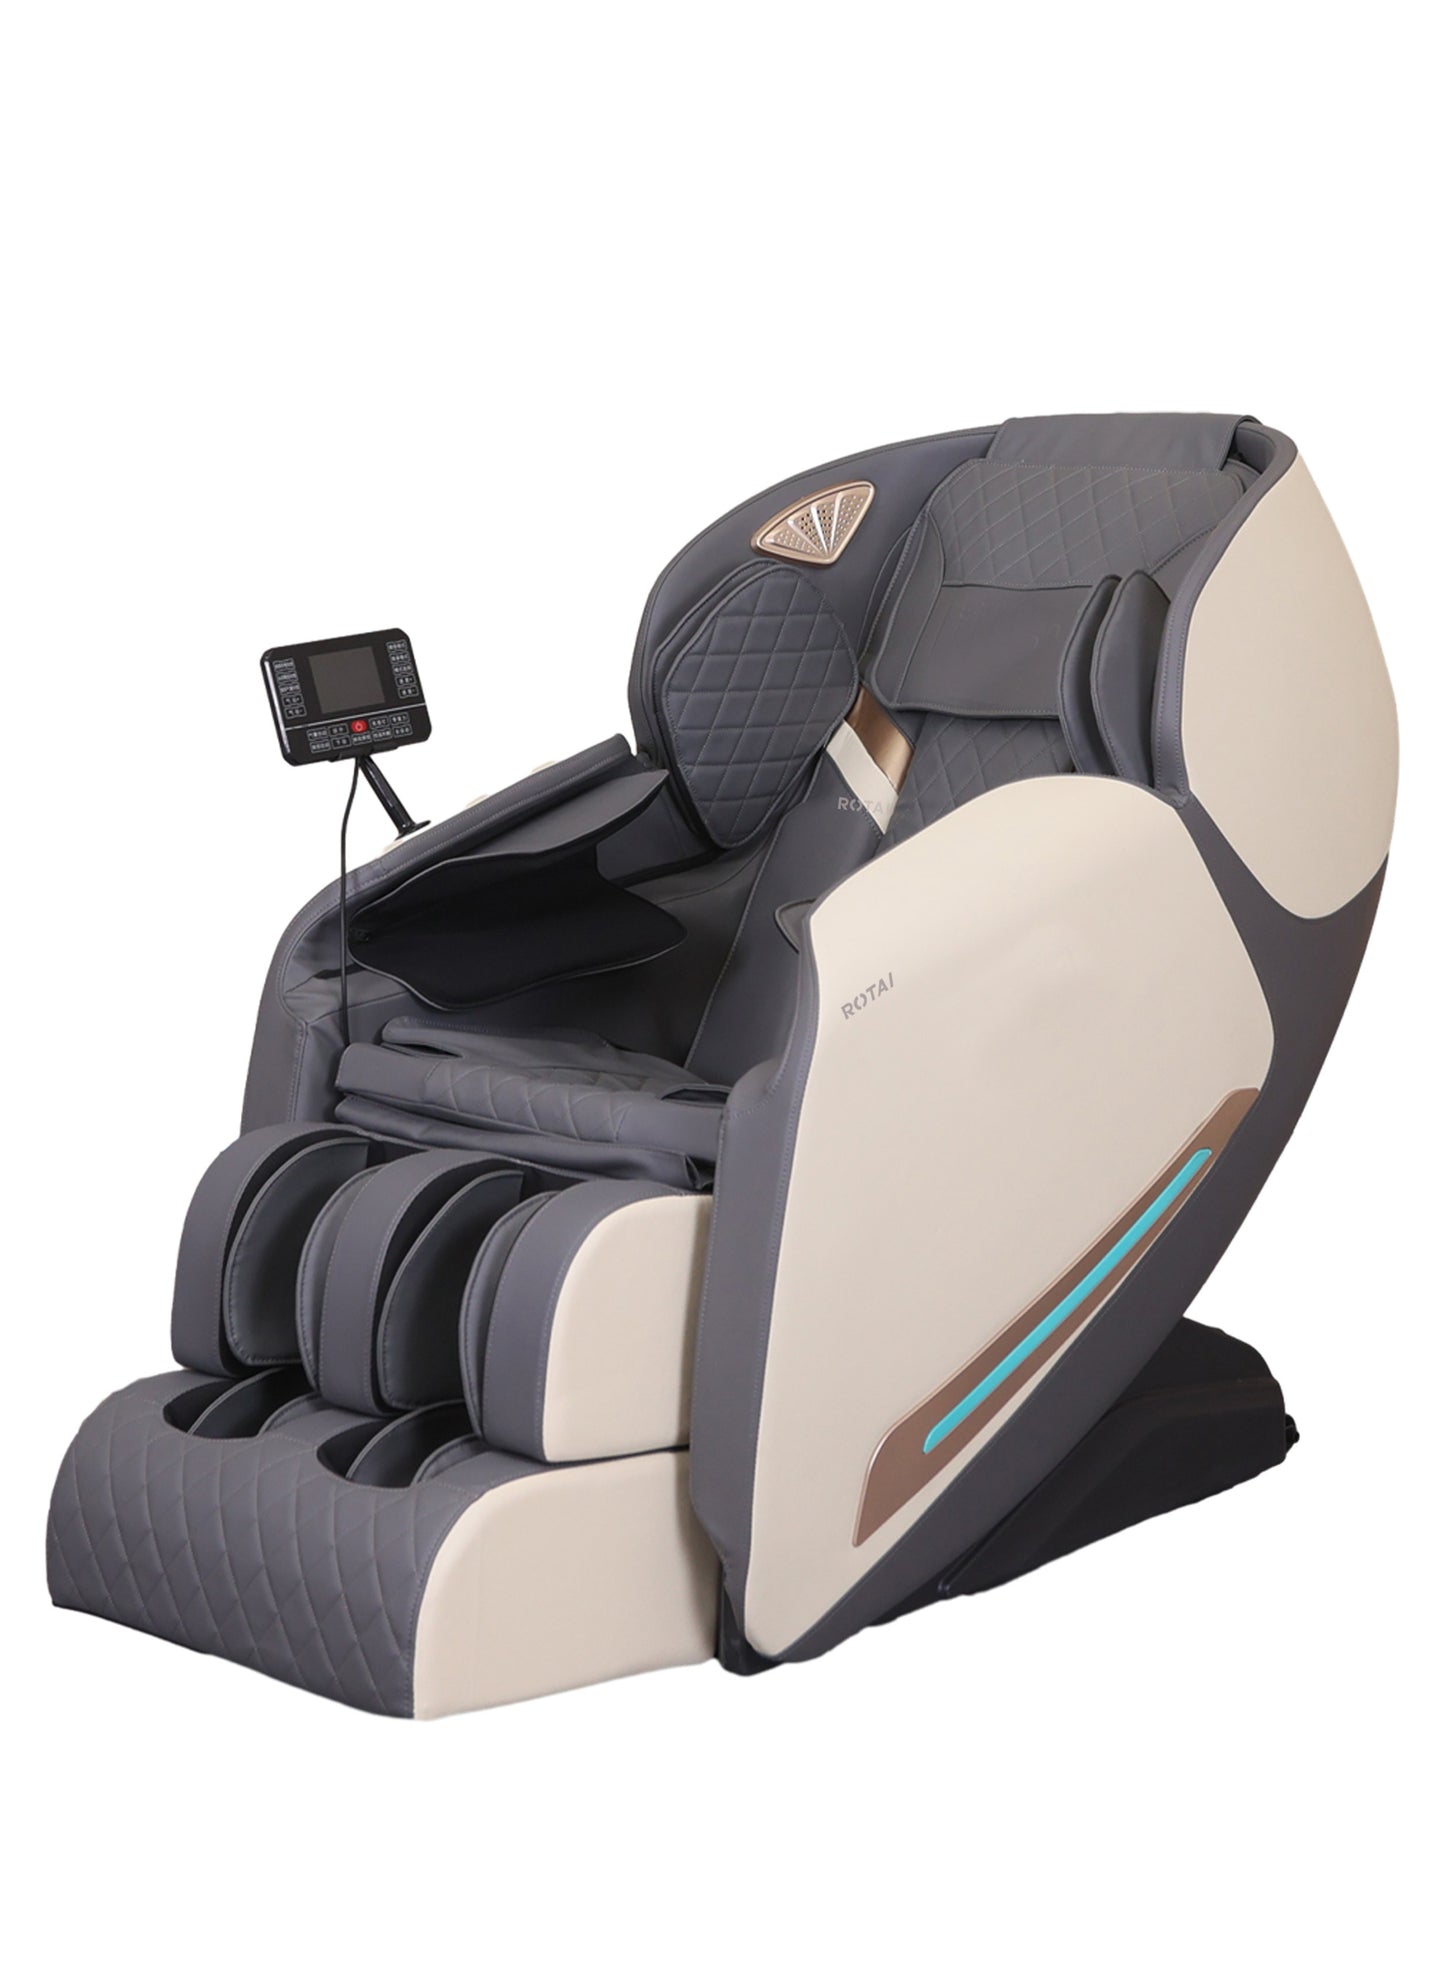 Hoyogen's Force Multi function 4D Massage Chair with 5 year Warranty